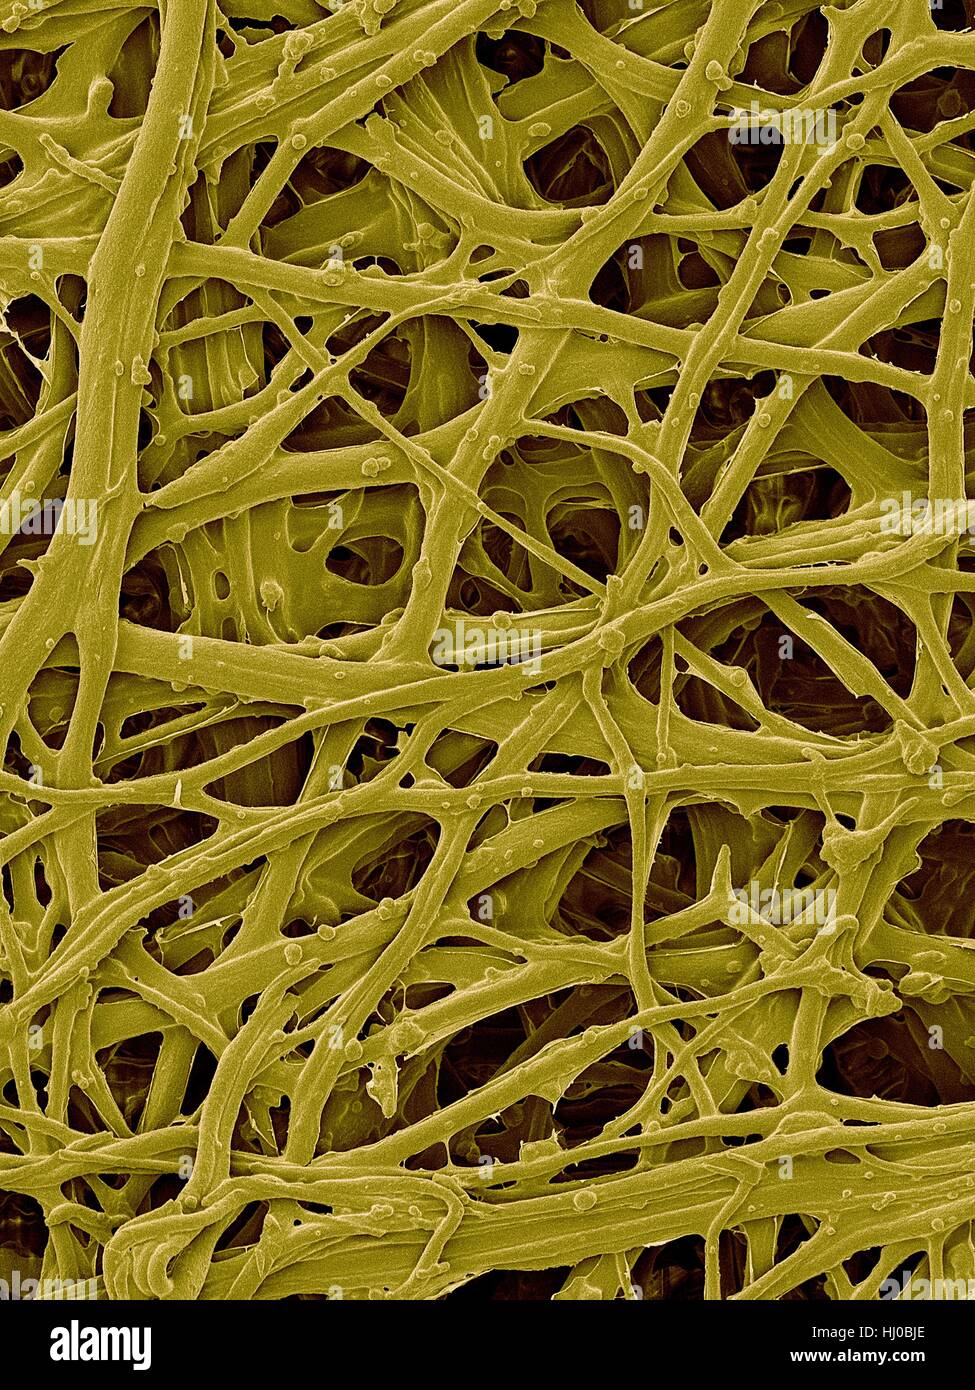 Coloured scanning electron micrograph (SEM) Chicken eggshell inner membrane (Gallus gallus domesticus).Shown here is eggshell inner membrane that is composed of protein fibres (internal attached to hard eggshell).Several membranes are found around embryo of bird egg.The inner eggshell membrane Stock Photo